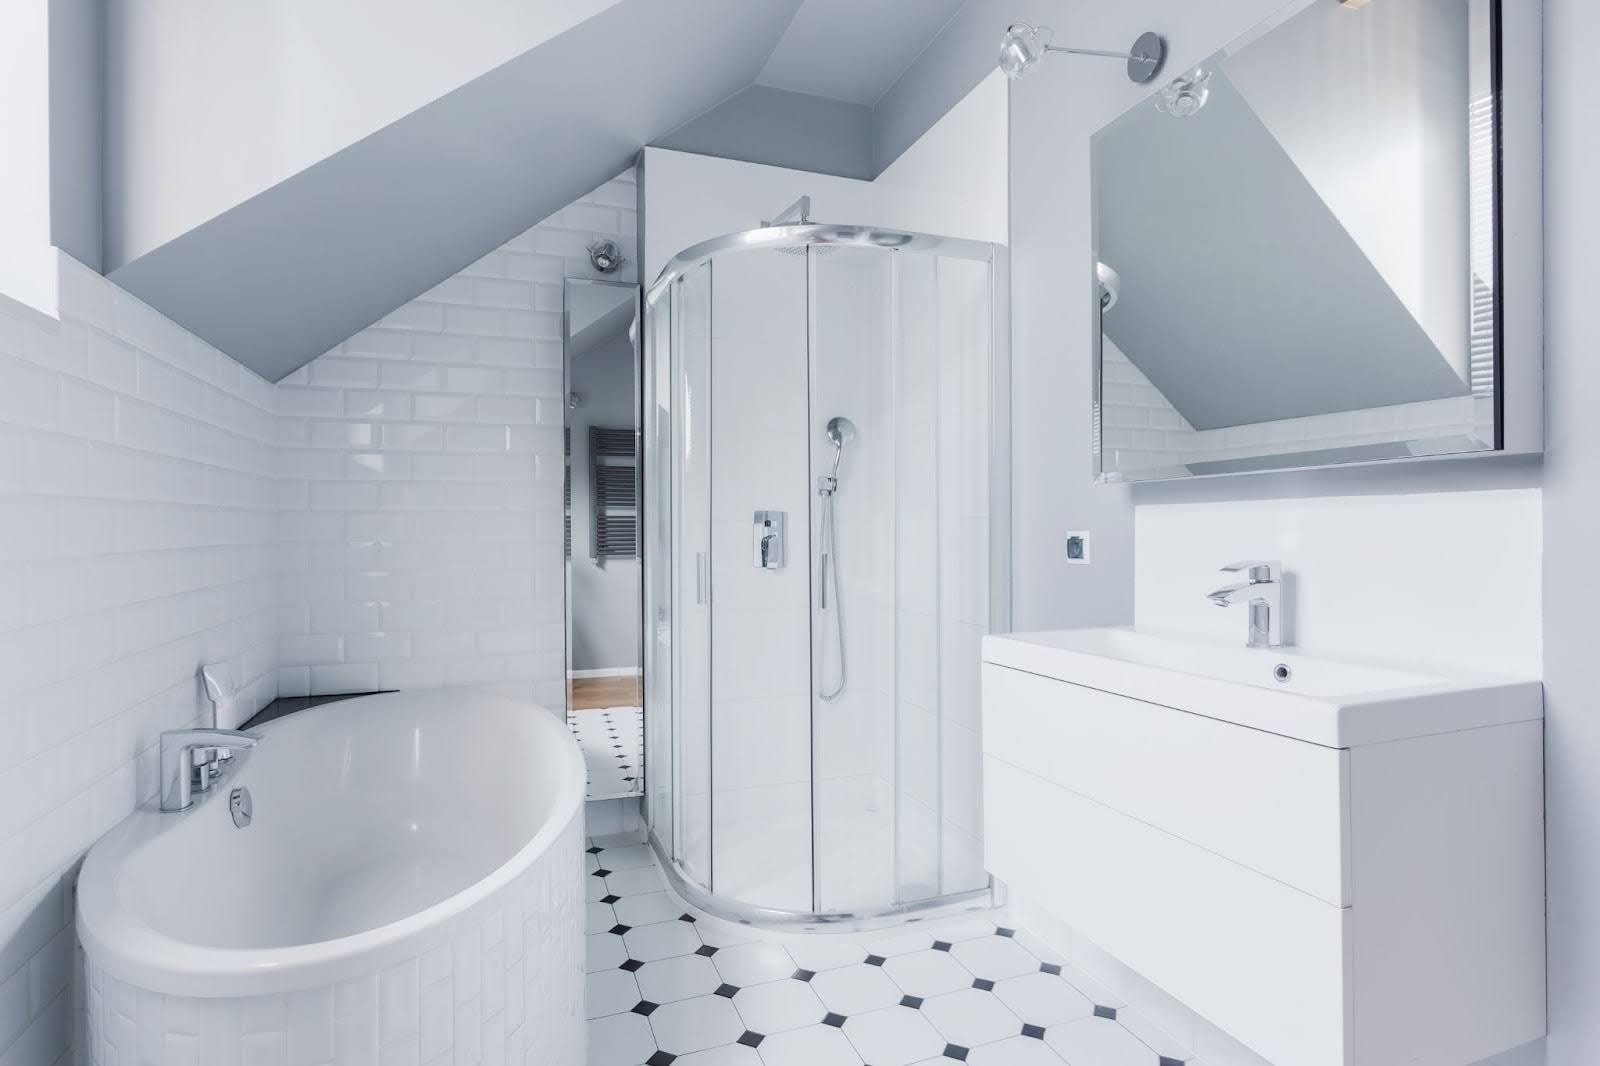 Small bathroom storage solutions when you have a big toilet, bath, and sink